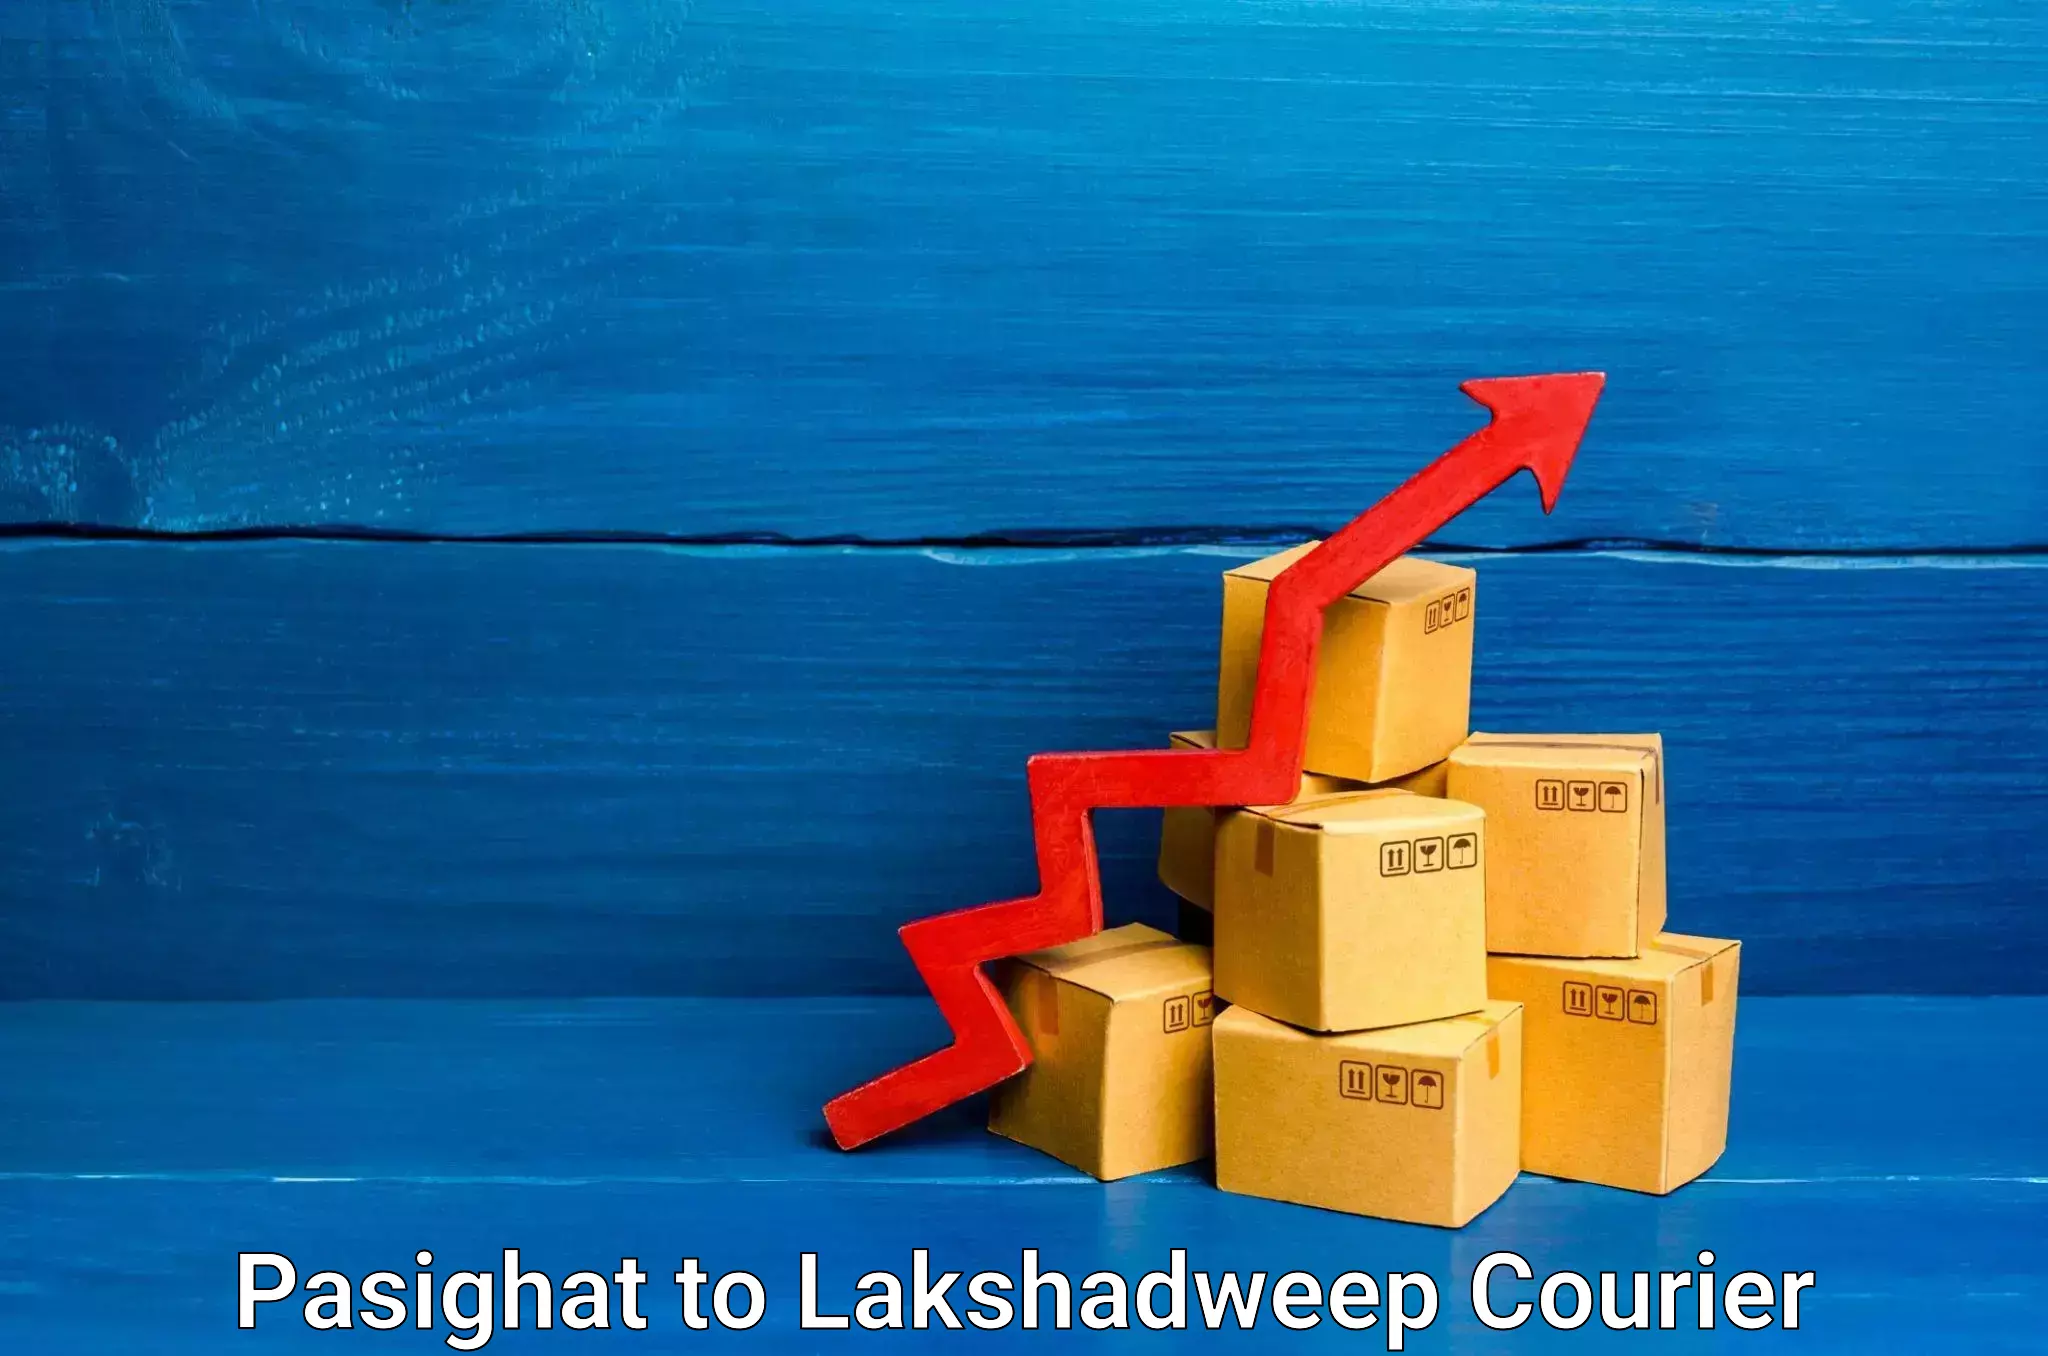 Express delivery capabilities Pasighat to Lakshadweep